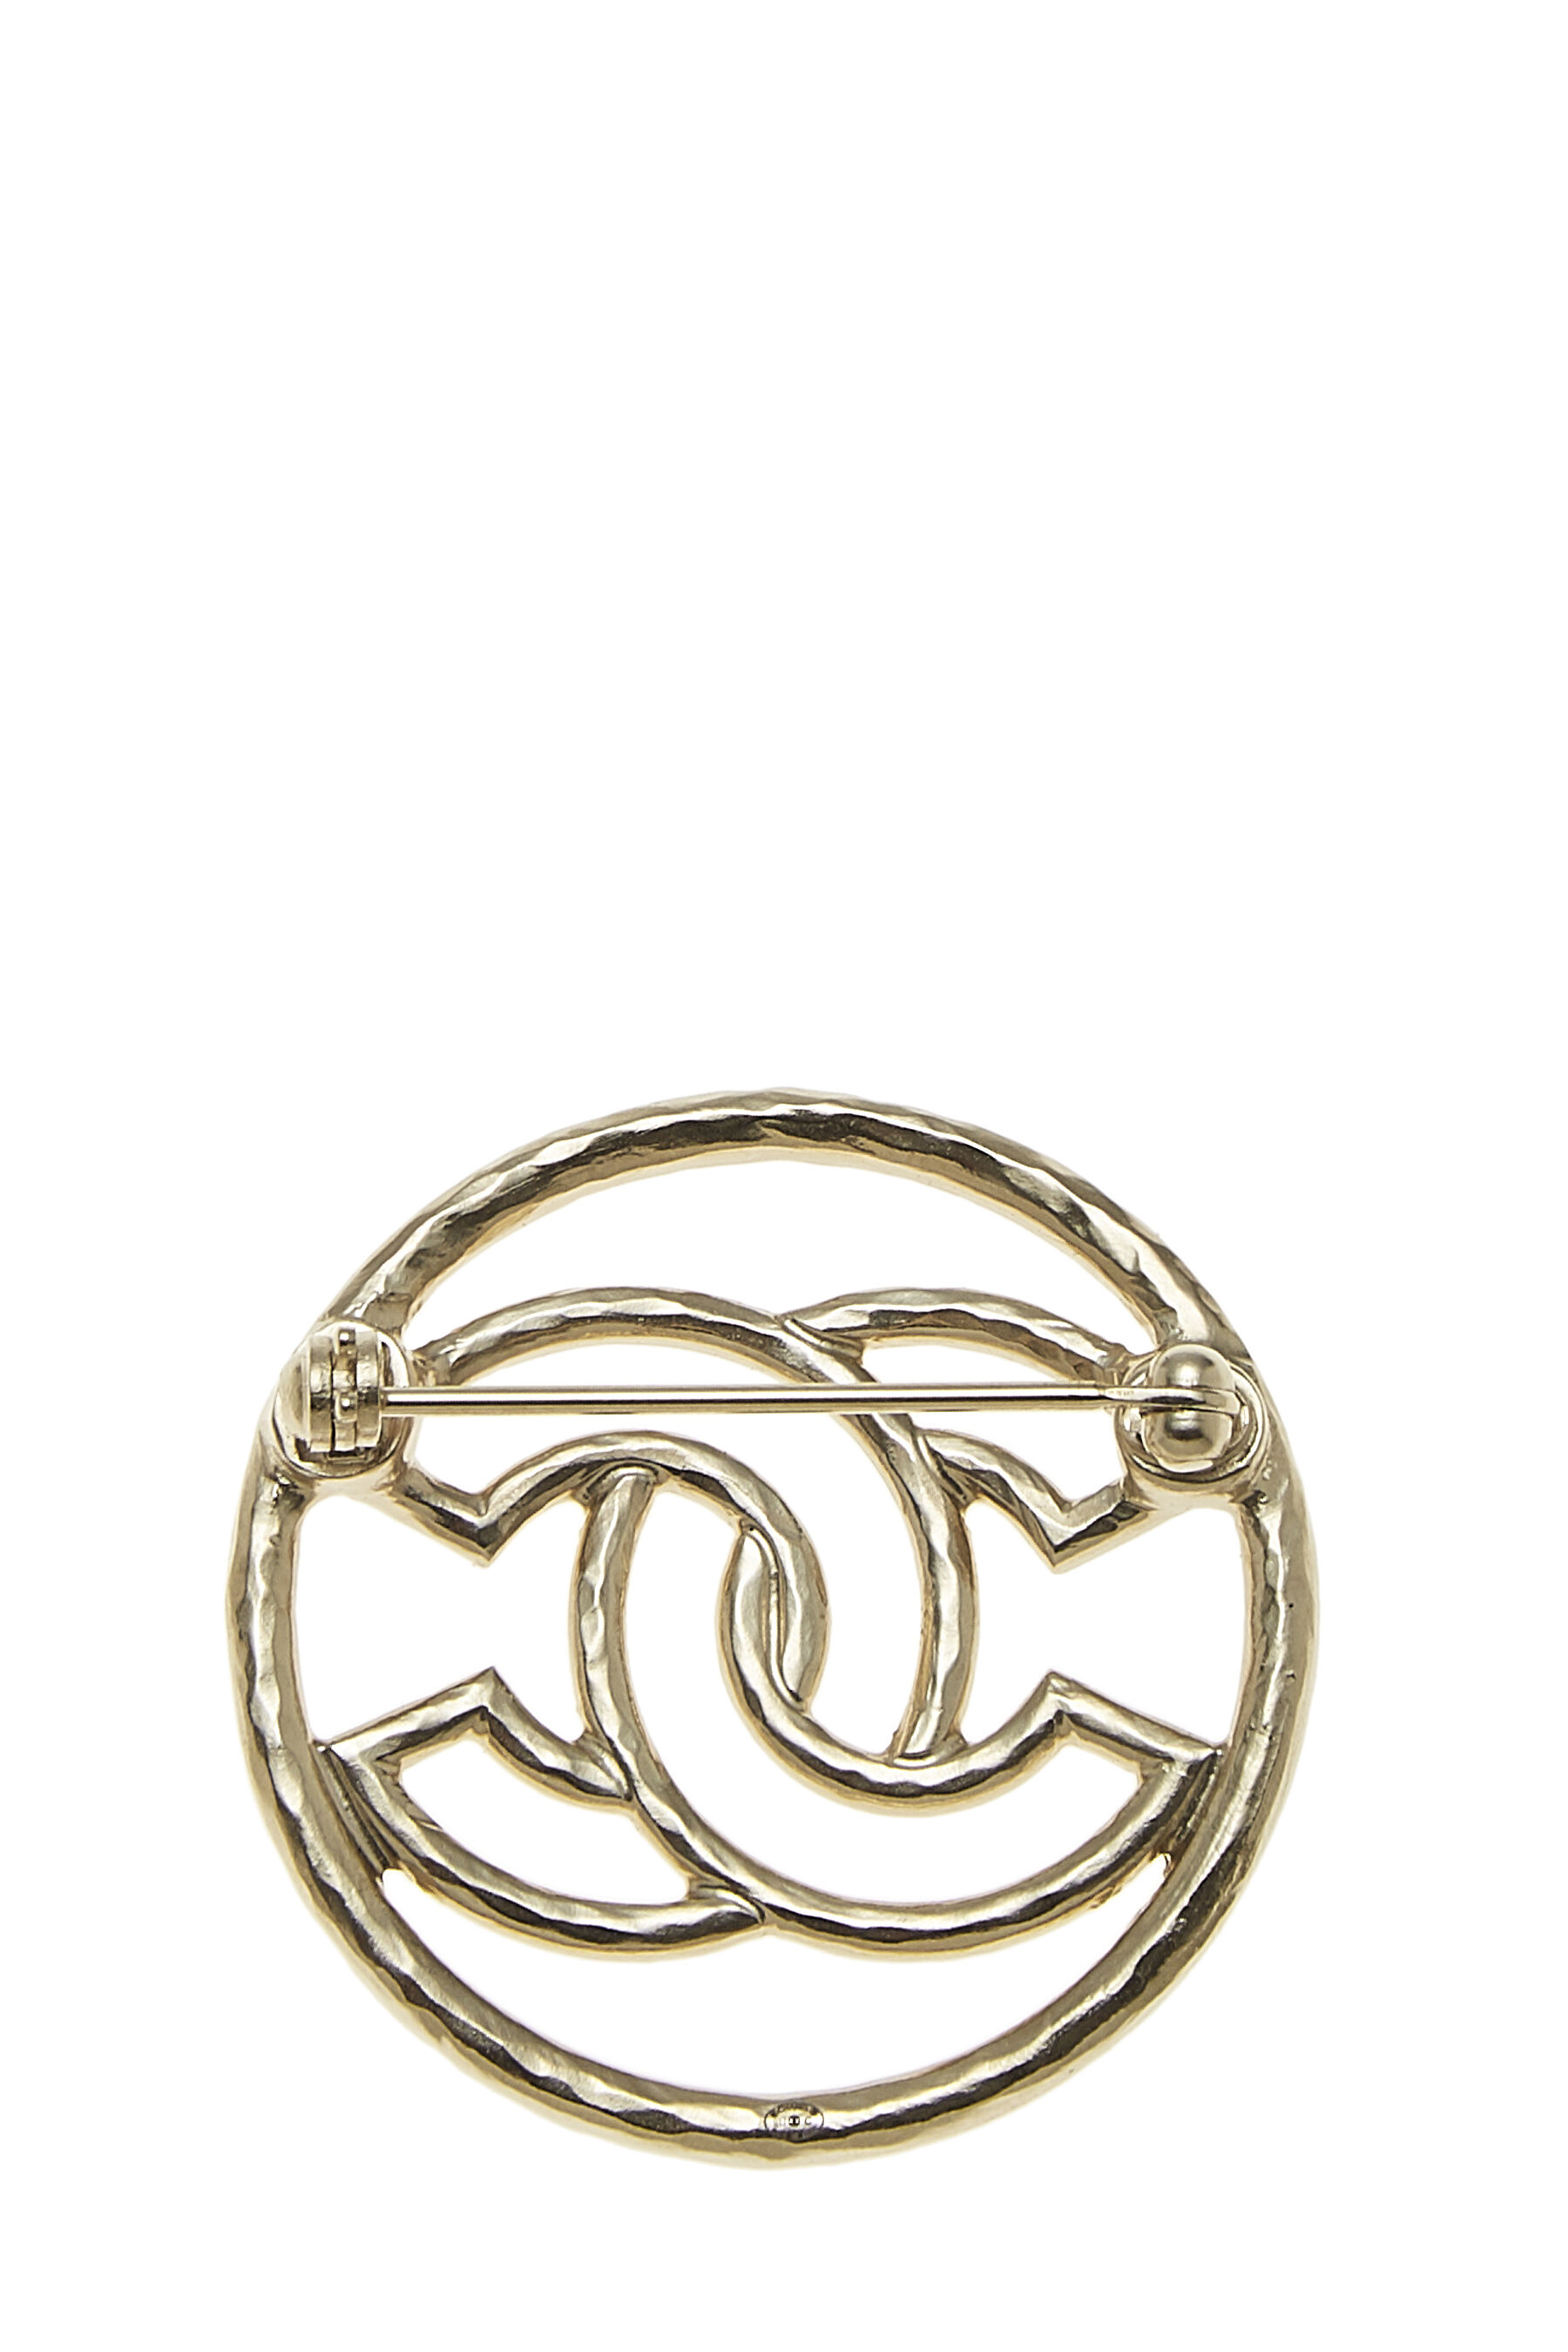 CHANEL GOLD CHANEL CC LOGO WHITE CRYSTALS CHARMS BROOCH PIN